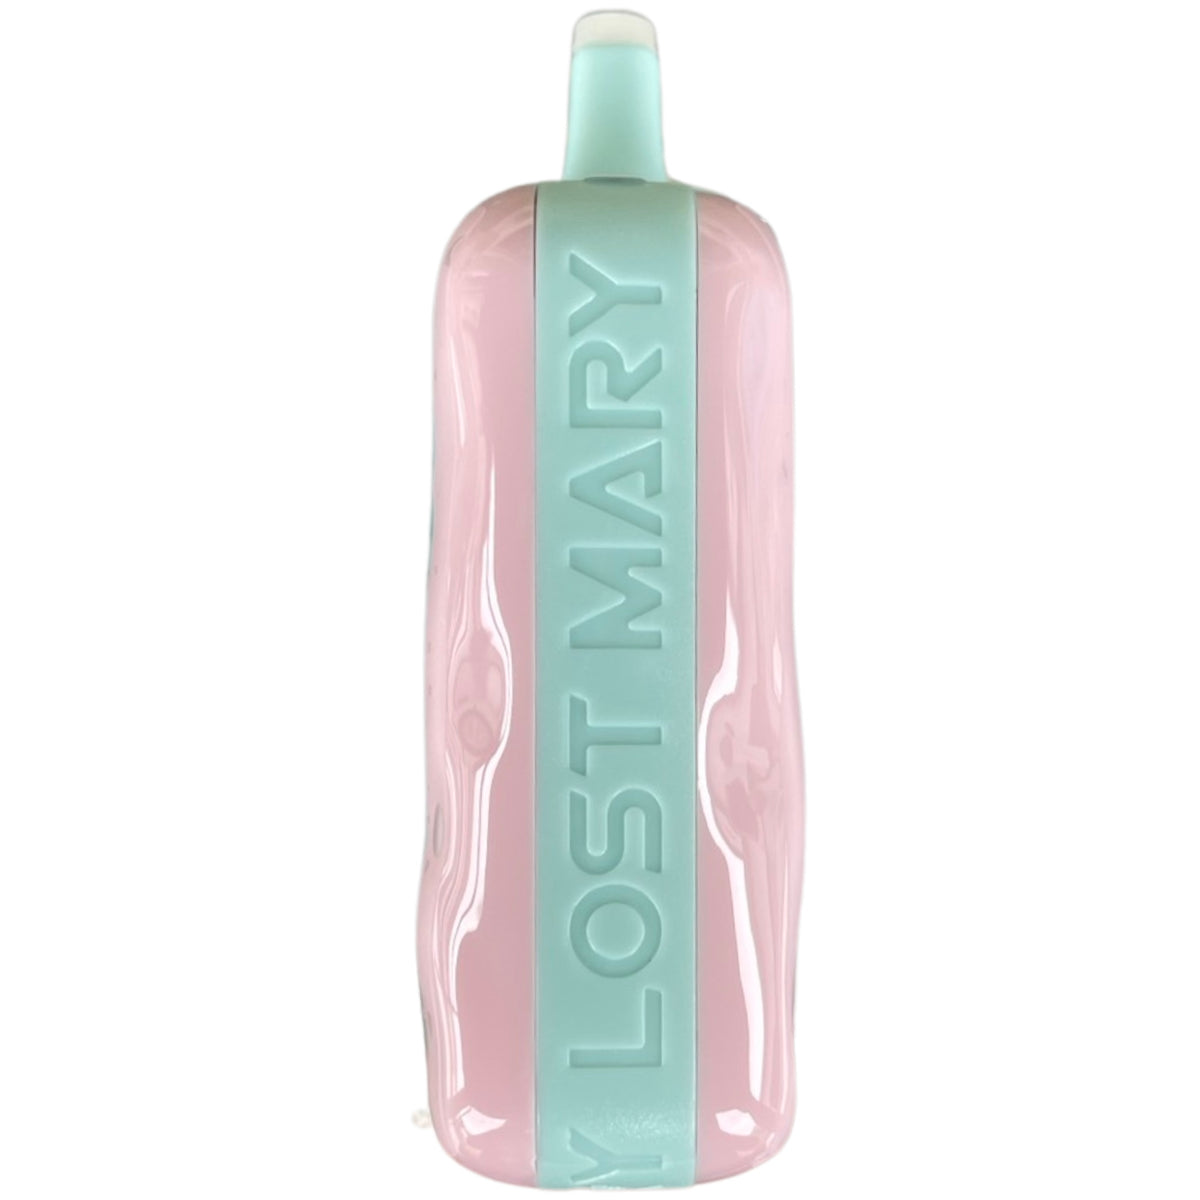 Lost Mary OS5000 - Blue Cotton Candy Disposable - $14.99 - VPRSTS